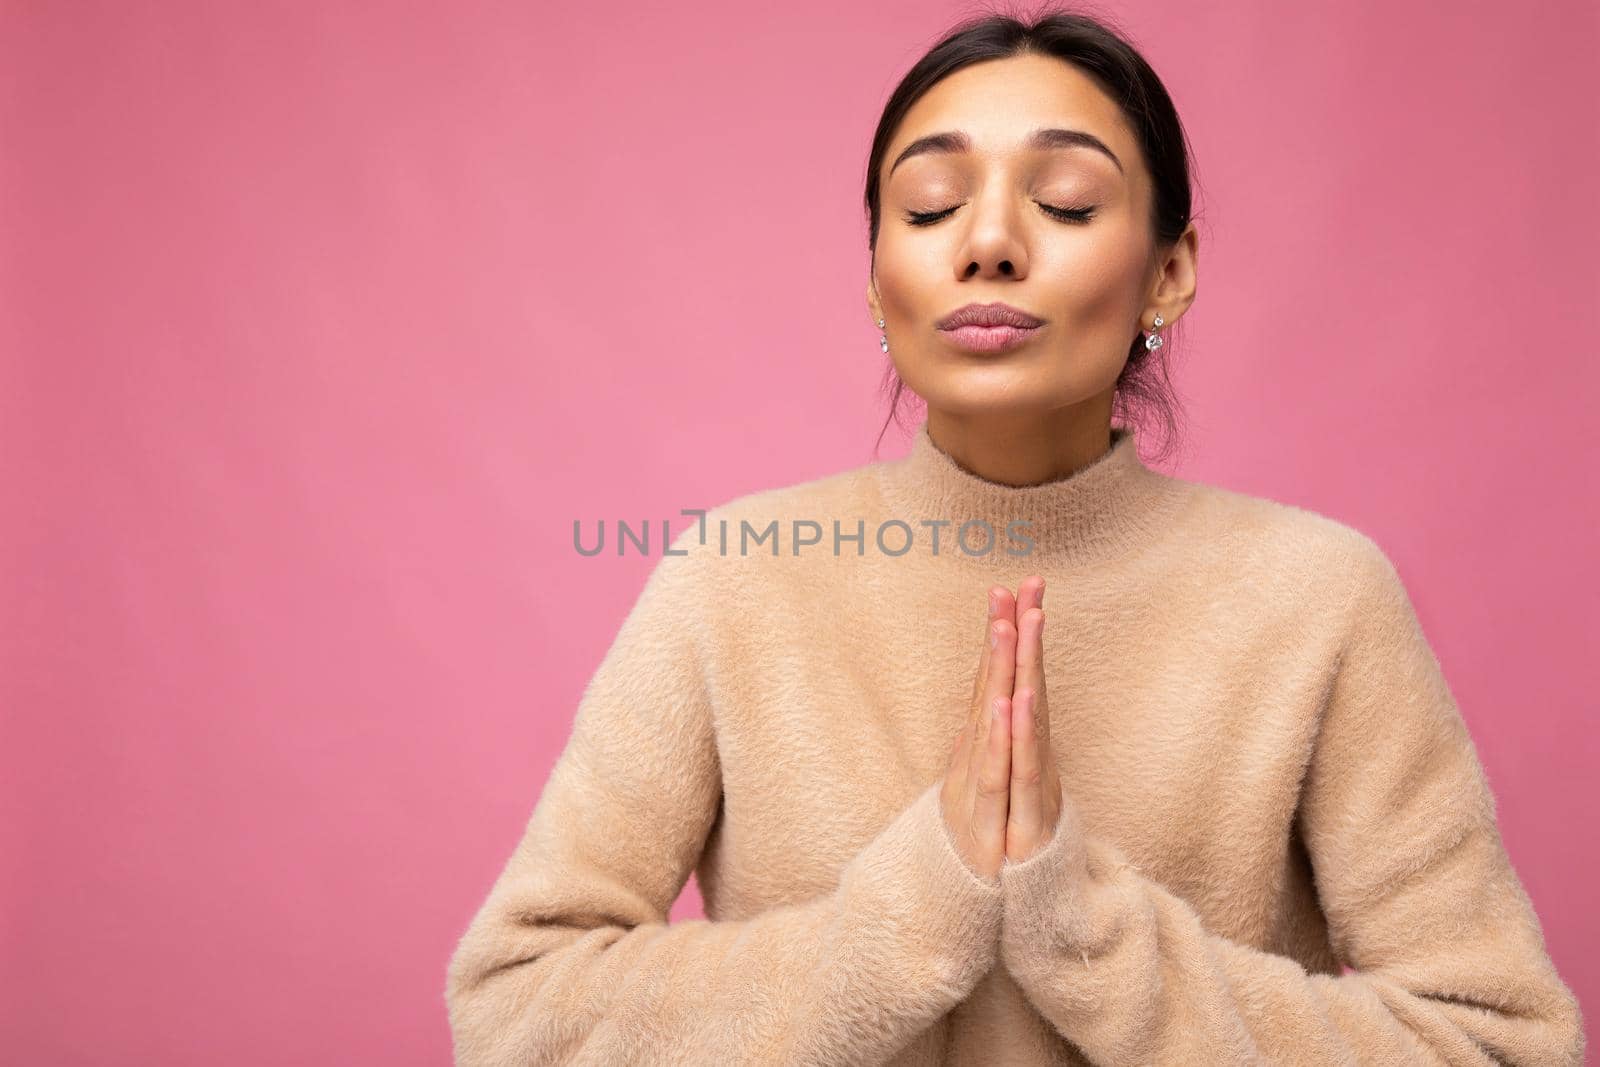 Portrait of young positive happy beautiful brunette woman with sincere emotions wearing casual beige jersey isolated over pink background with free space and holding hands in praying gesture.